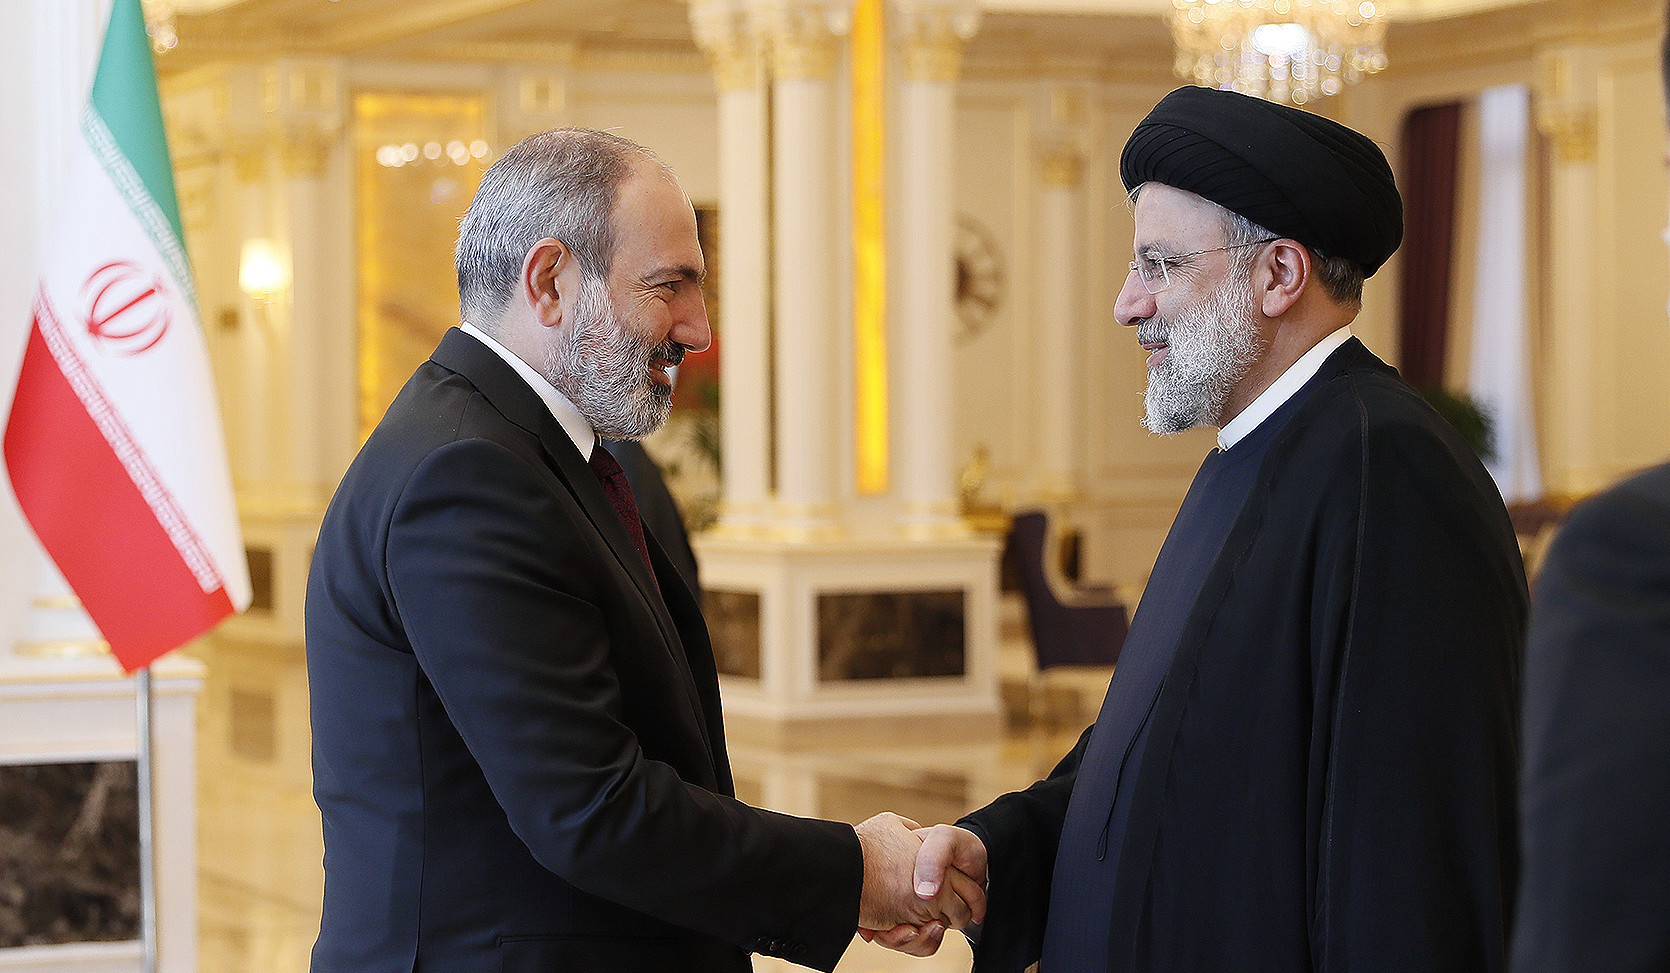 President of Iran sends congratulatory message to Prime Minister of Armenia on Independence Day